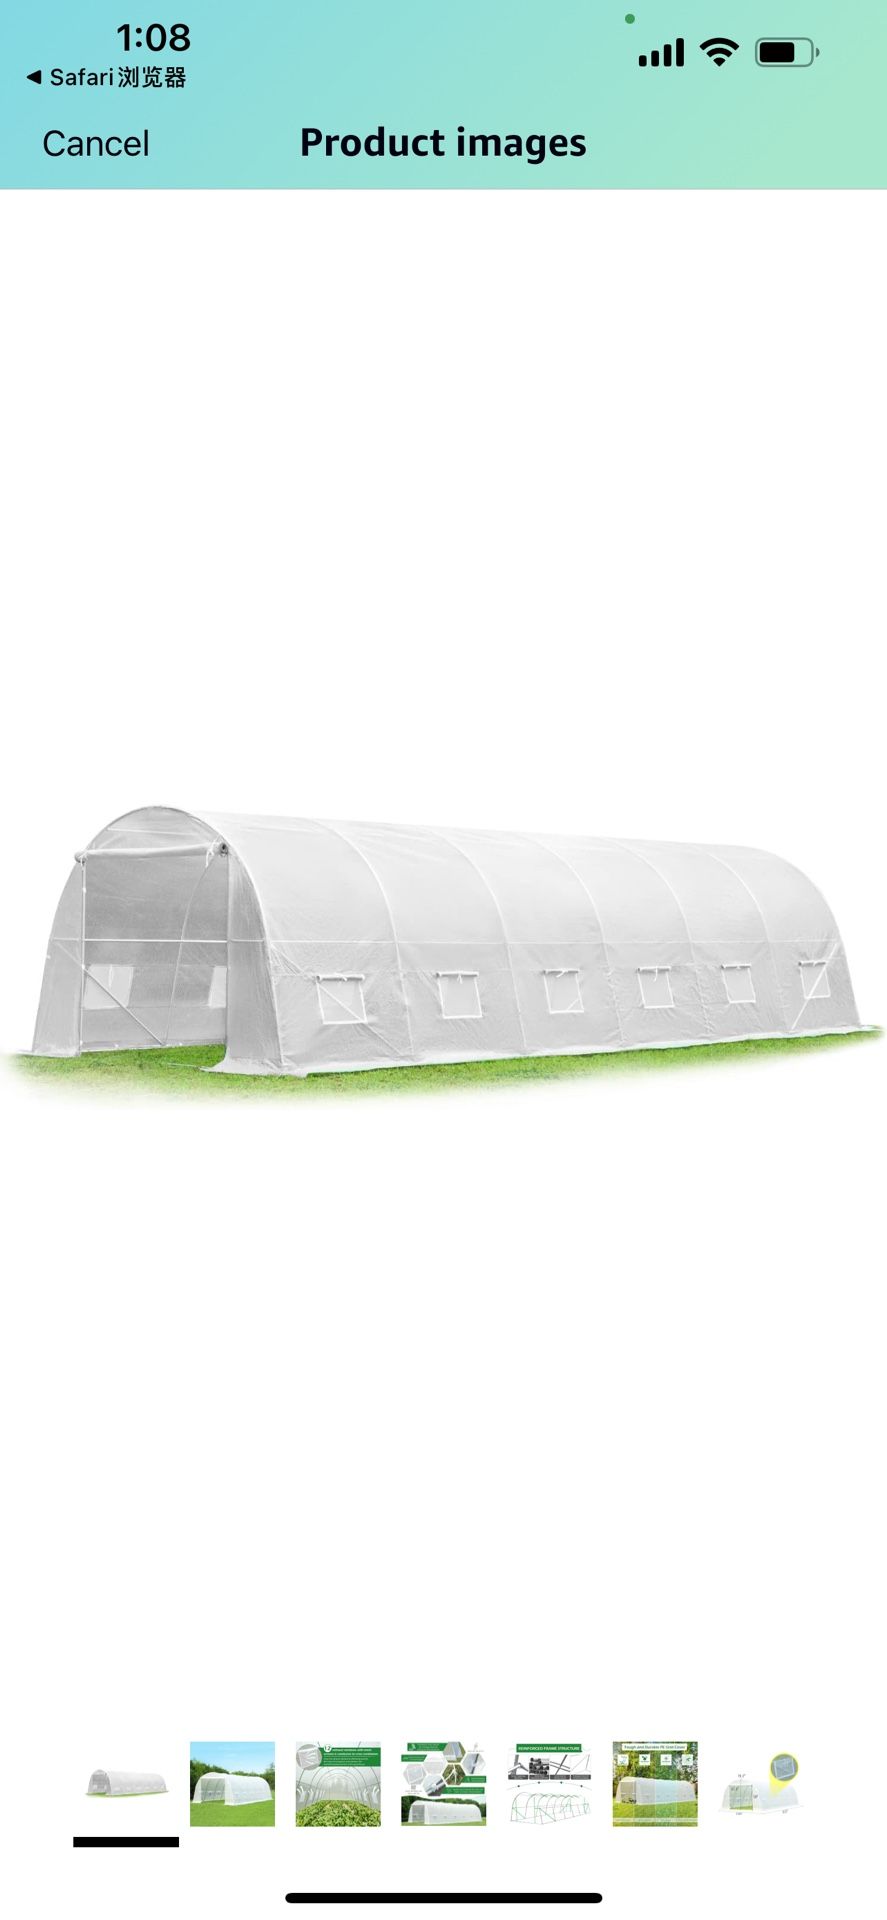 New in box 26' x 10' x 6.6' Greenhouse Large Gardening Plant Green House Hot House Portable Walking in Tunnel Tent, White